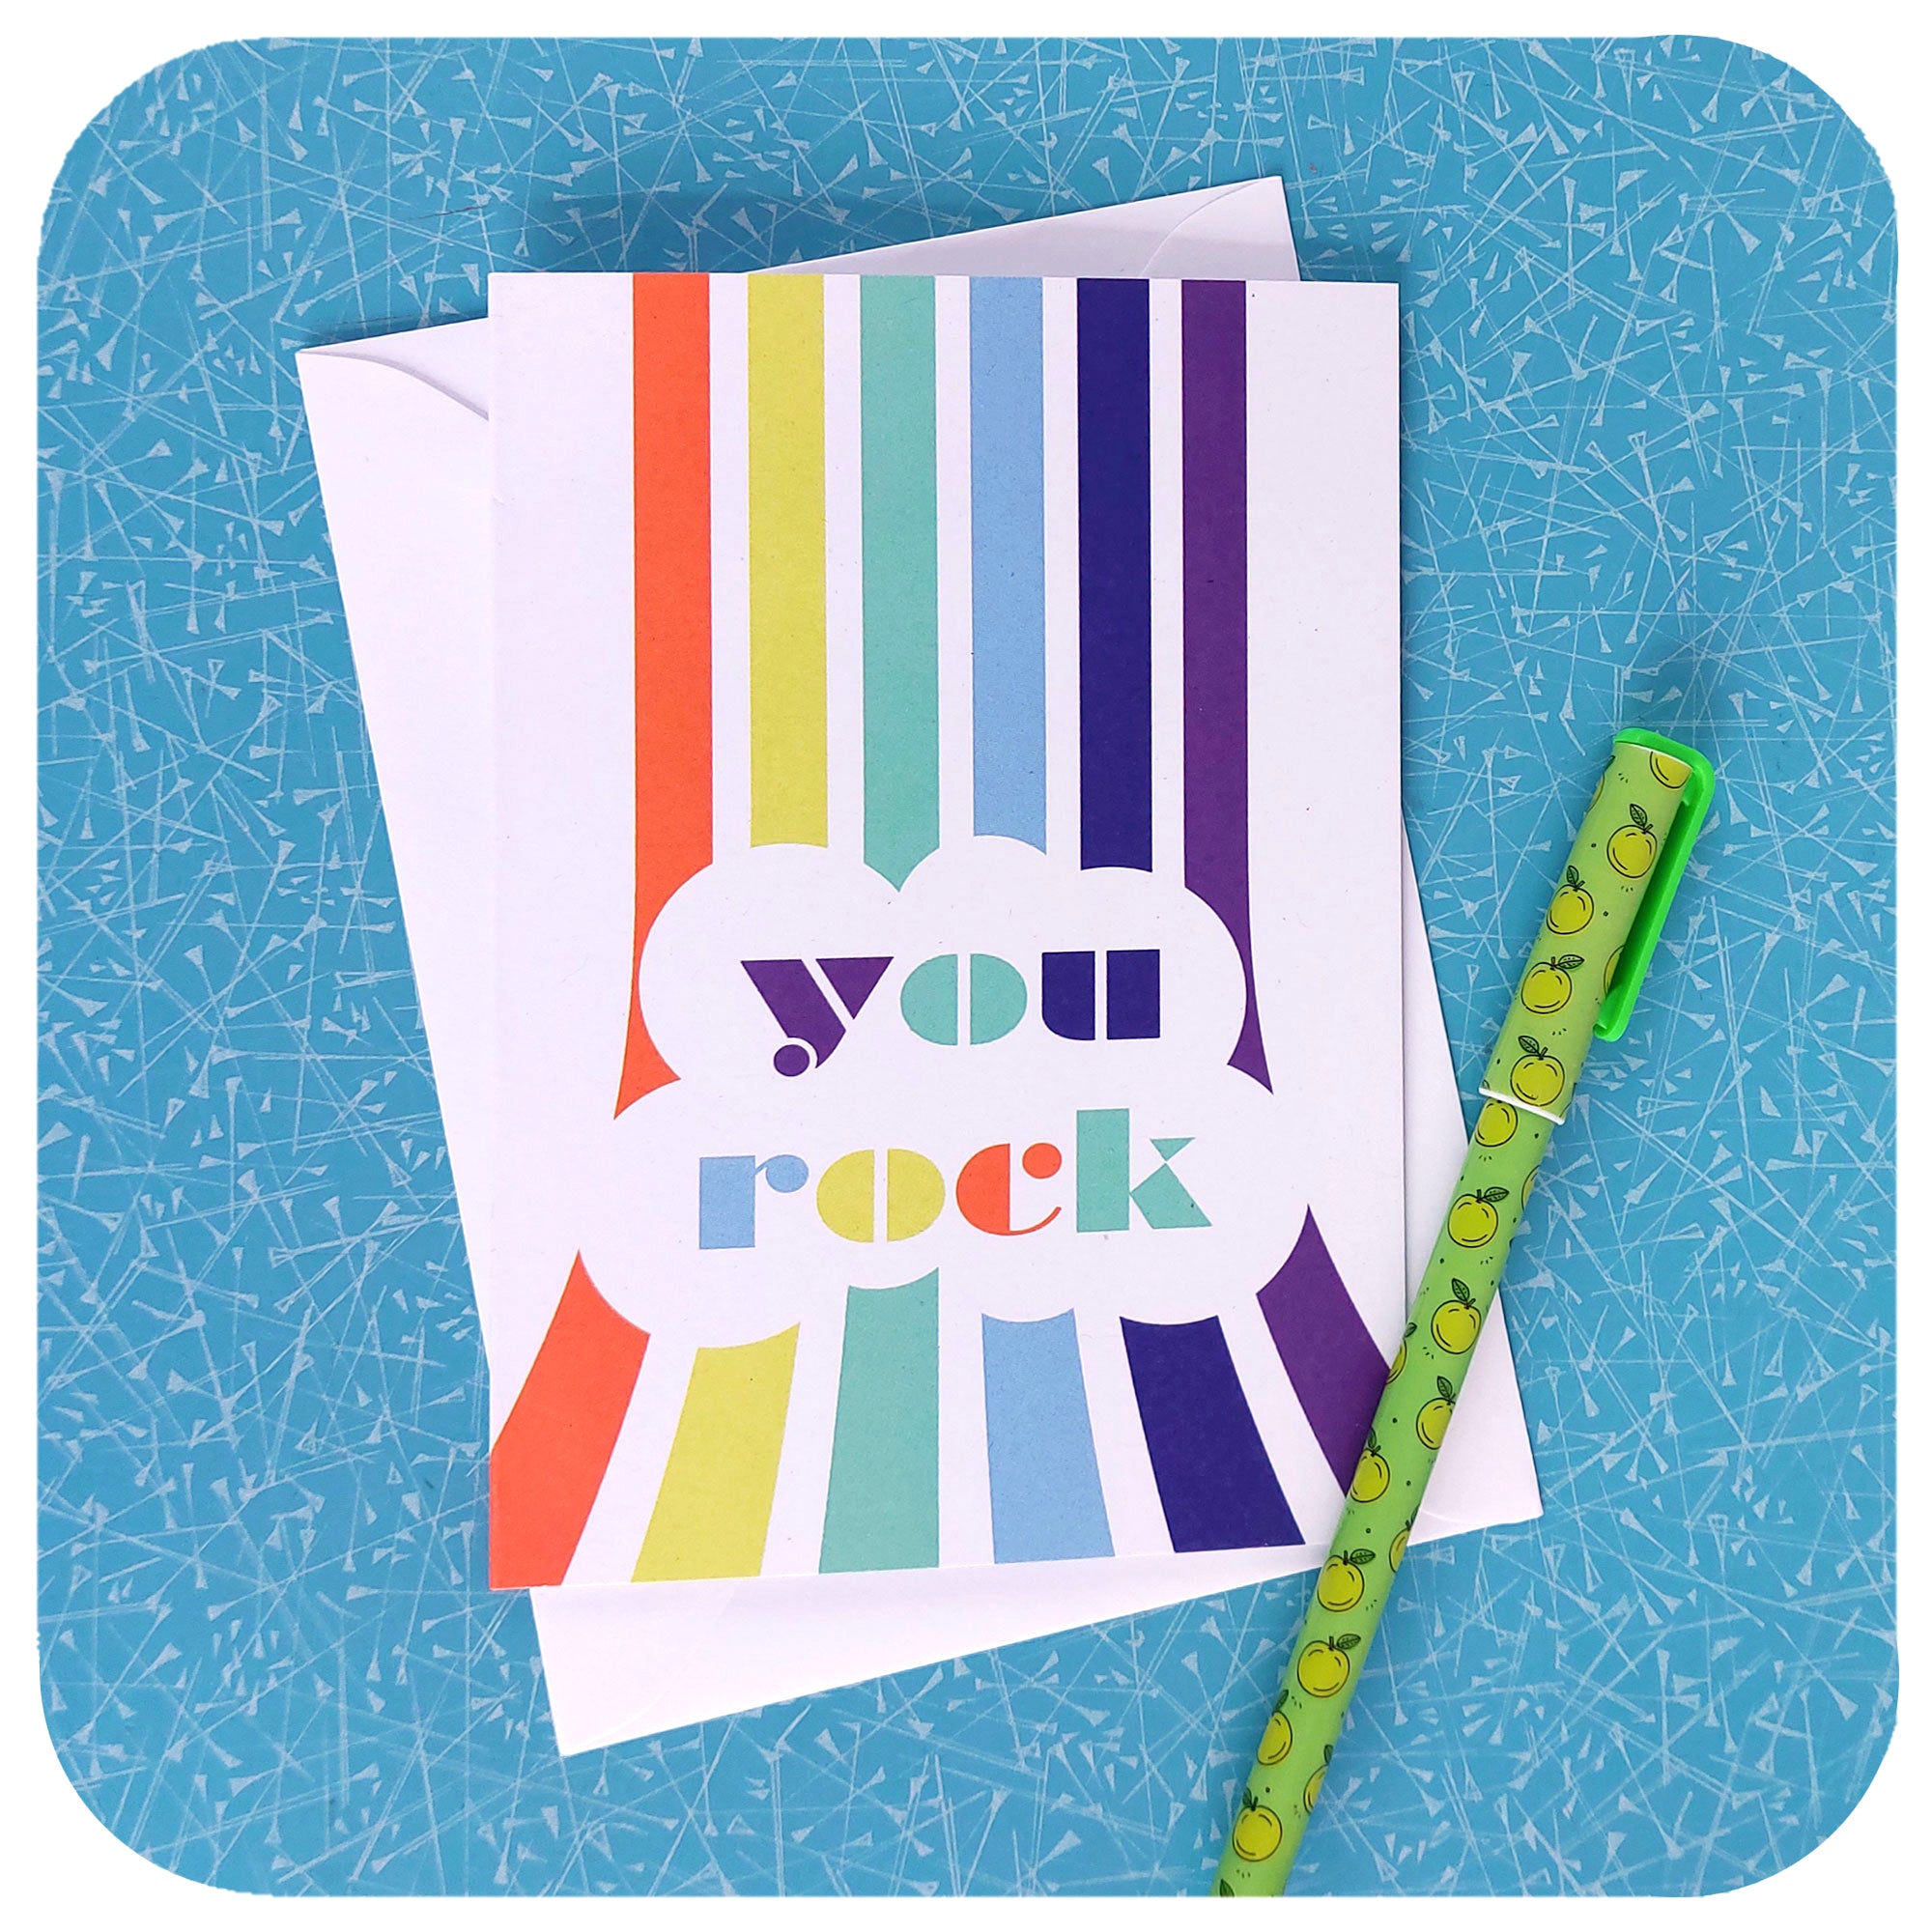 "You Rock" Greetings Card on blue table with white envelope and green pen | The Inkabilly Emporium